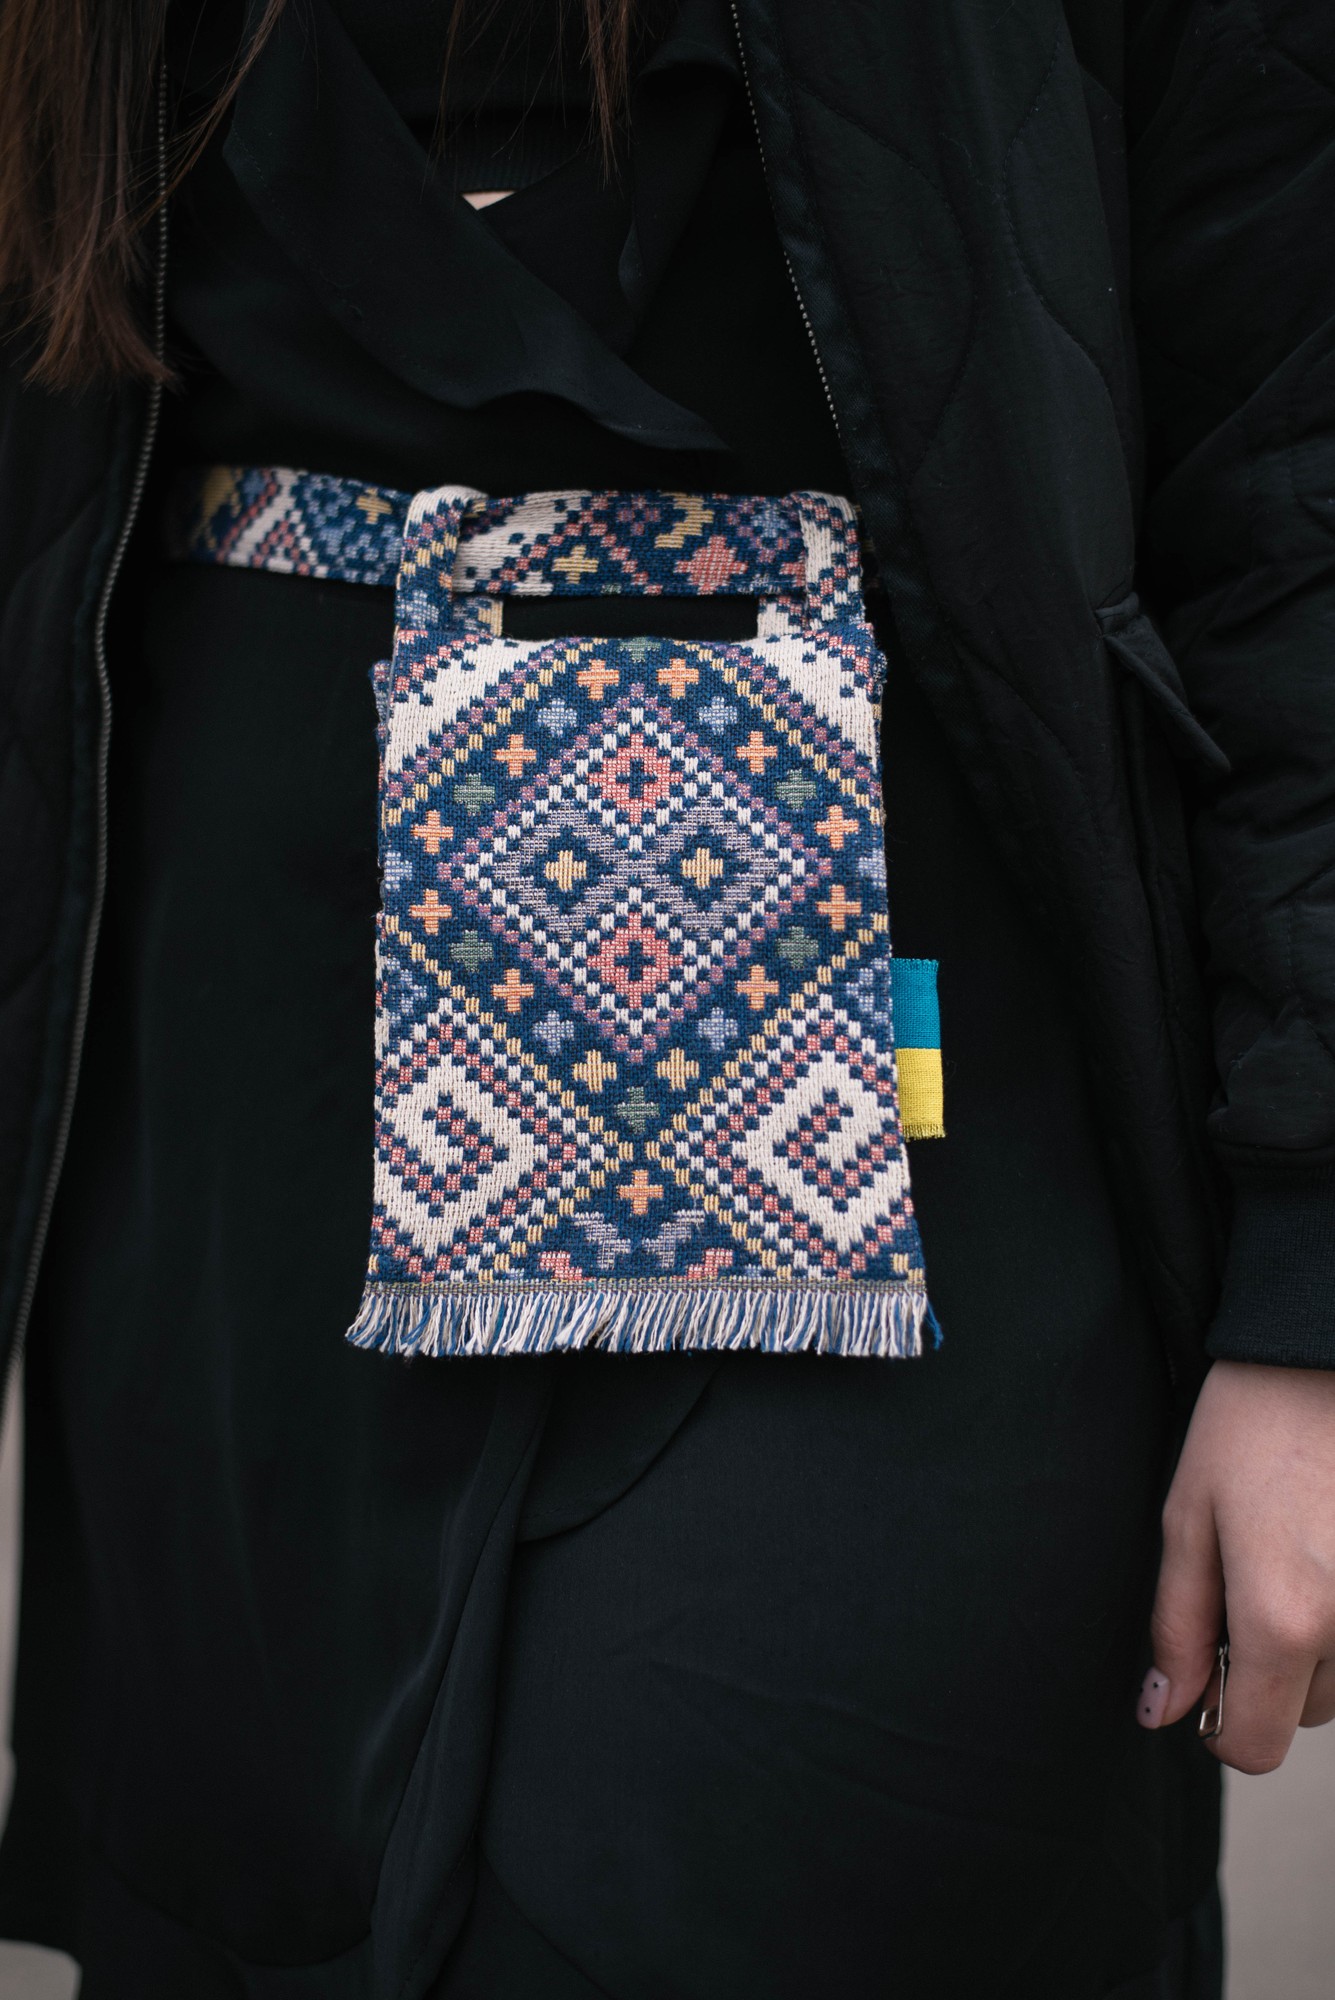 Women's bag-wallet "Haman tapestry A" in ethno style.